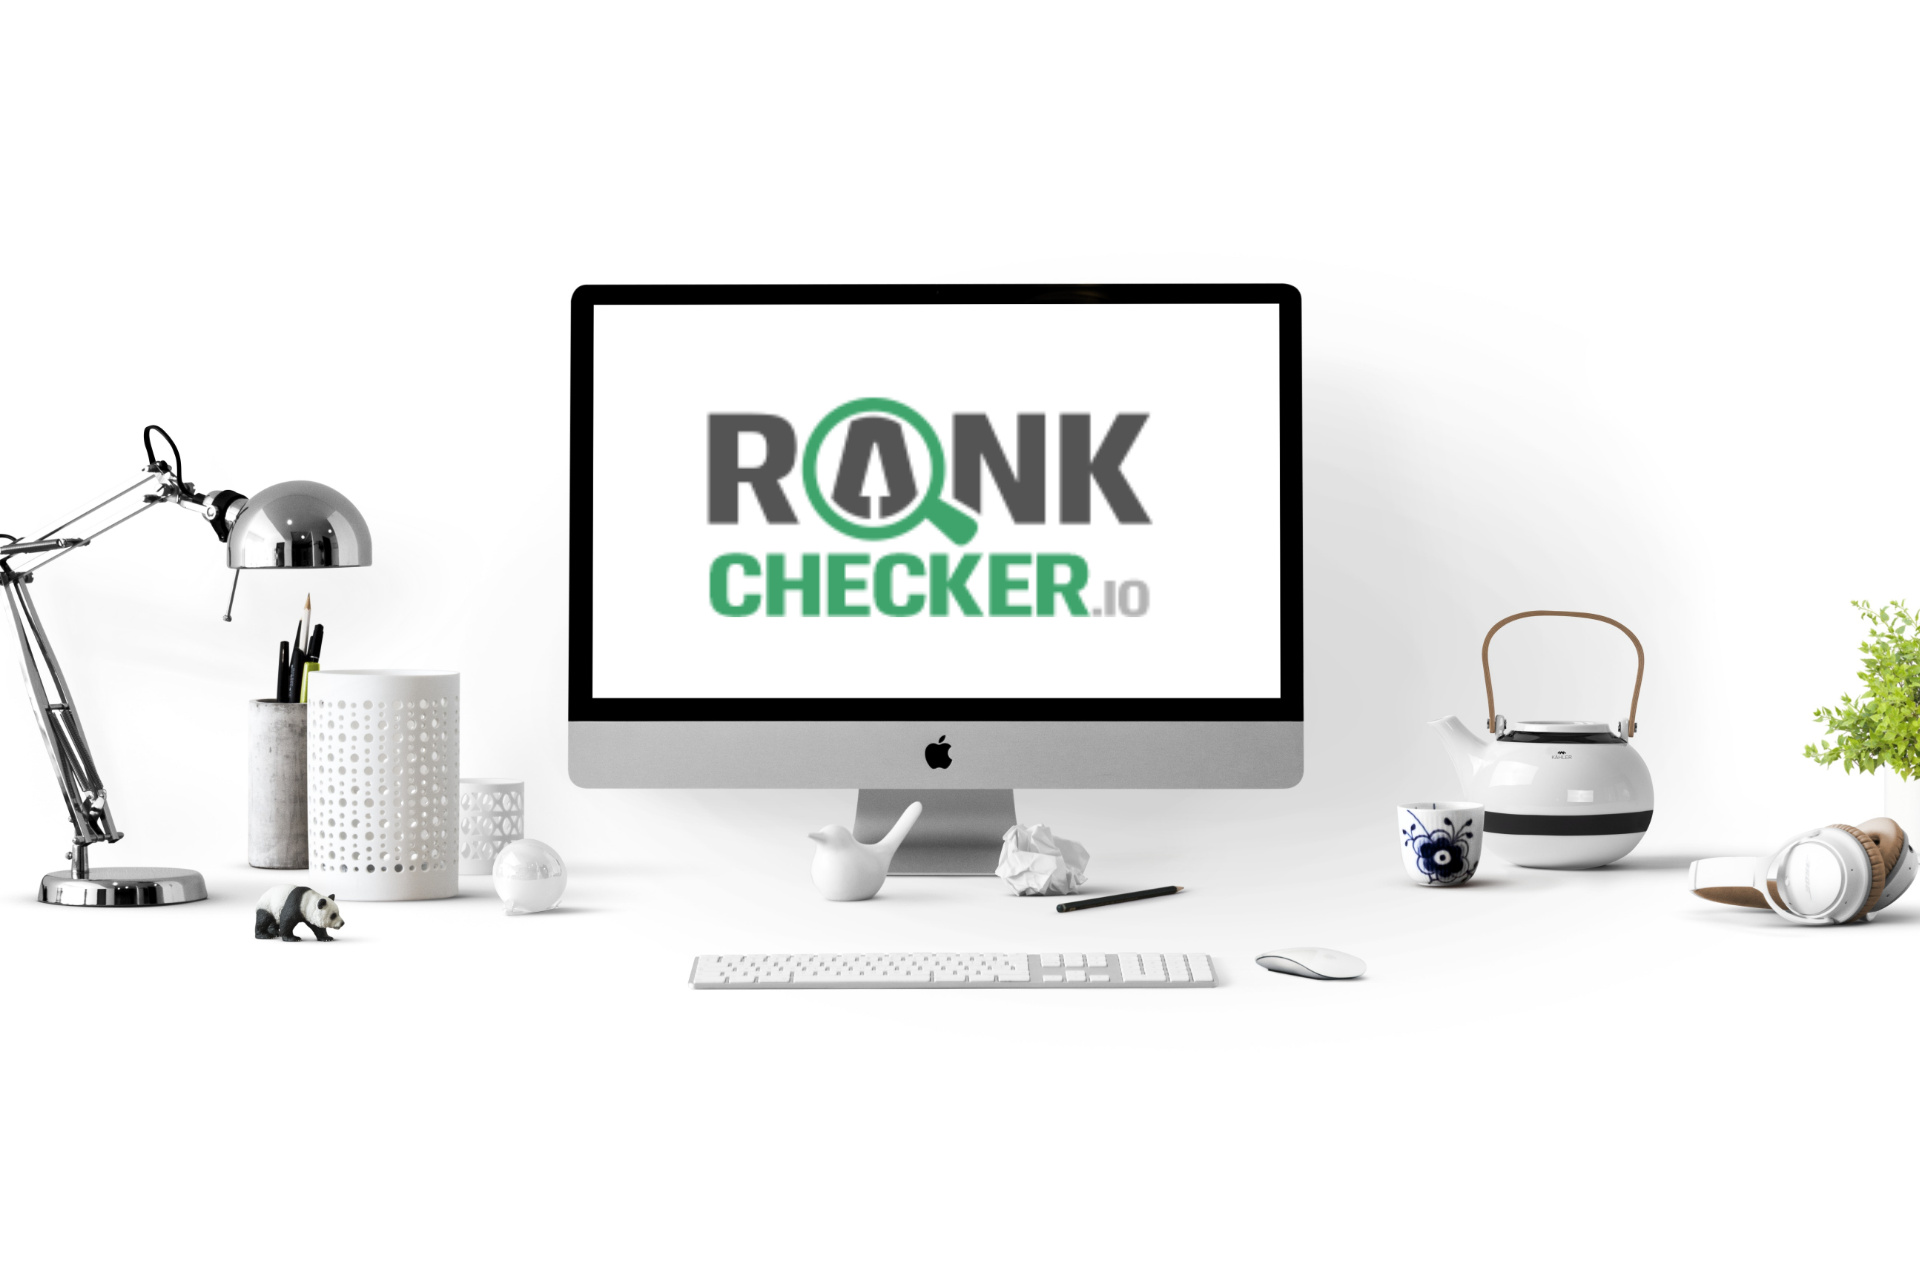 How To Boost Game Site With Free KeyWord Rankchecker?